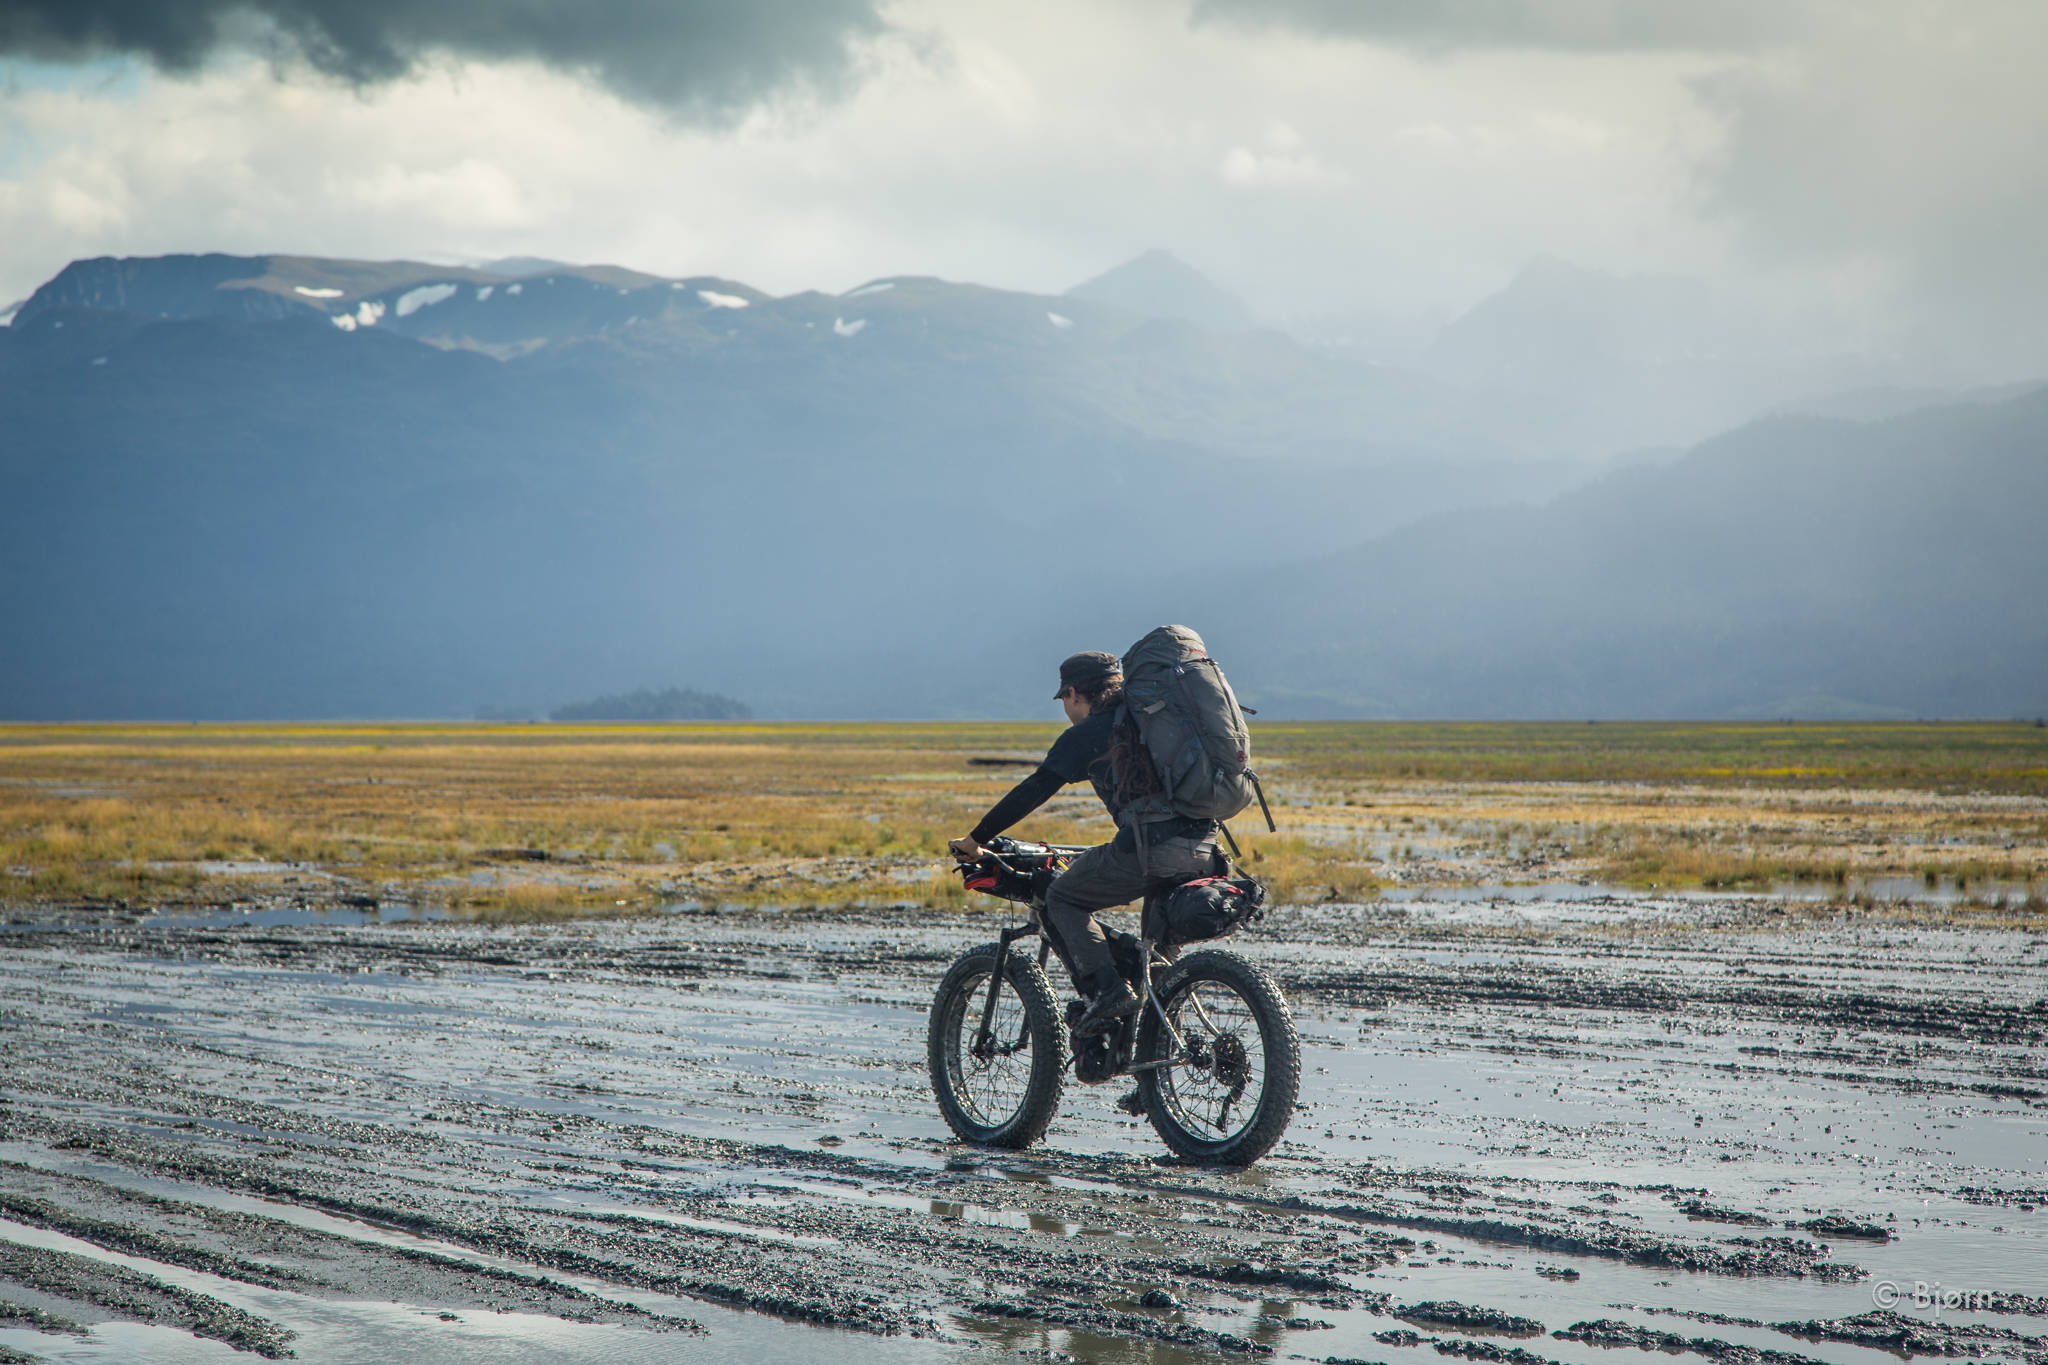 Daniel Countiss attempts to stay upright on his fat-bike while riding in slippery mud at the head of Kachemak Bay. (Photo by Bjørn Olson)